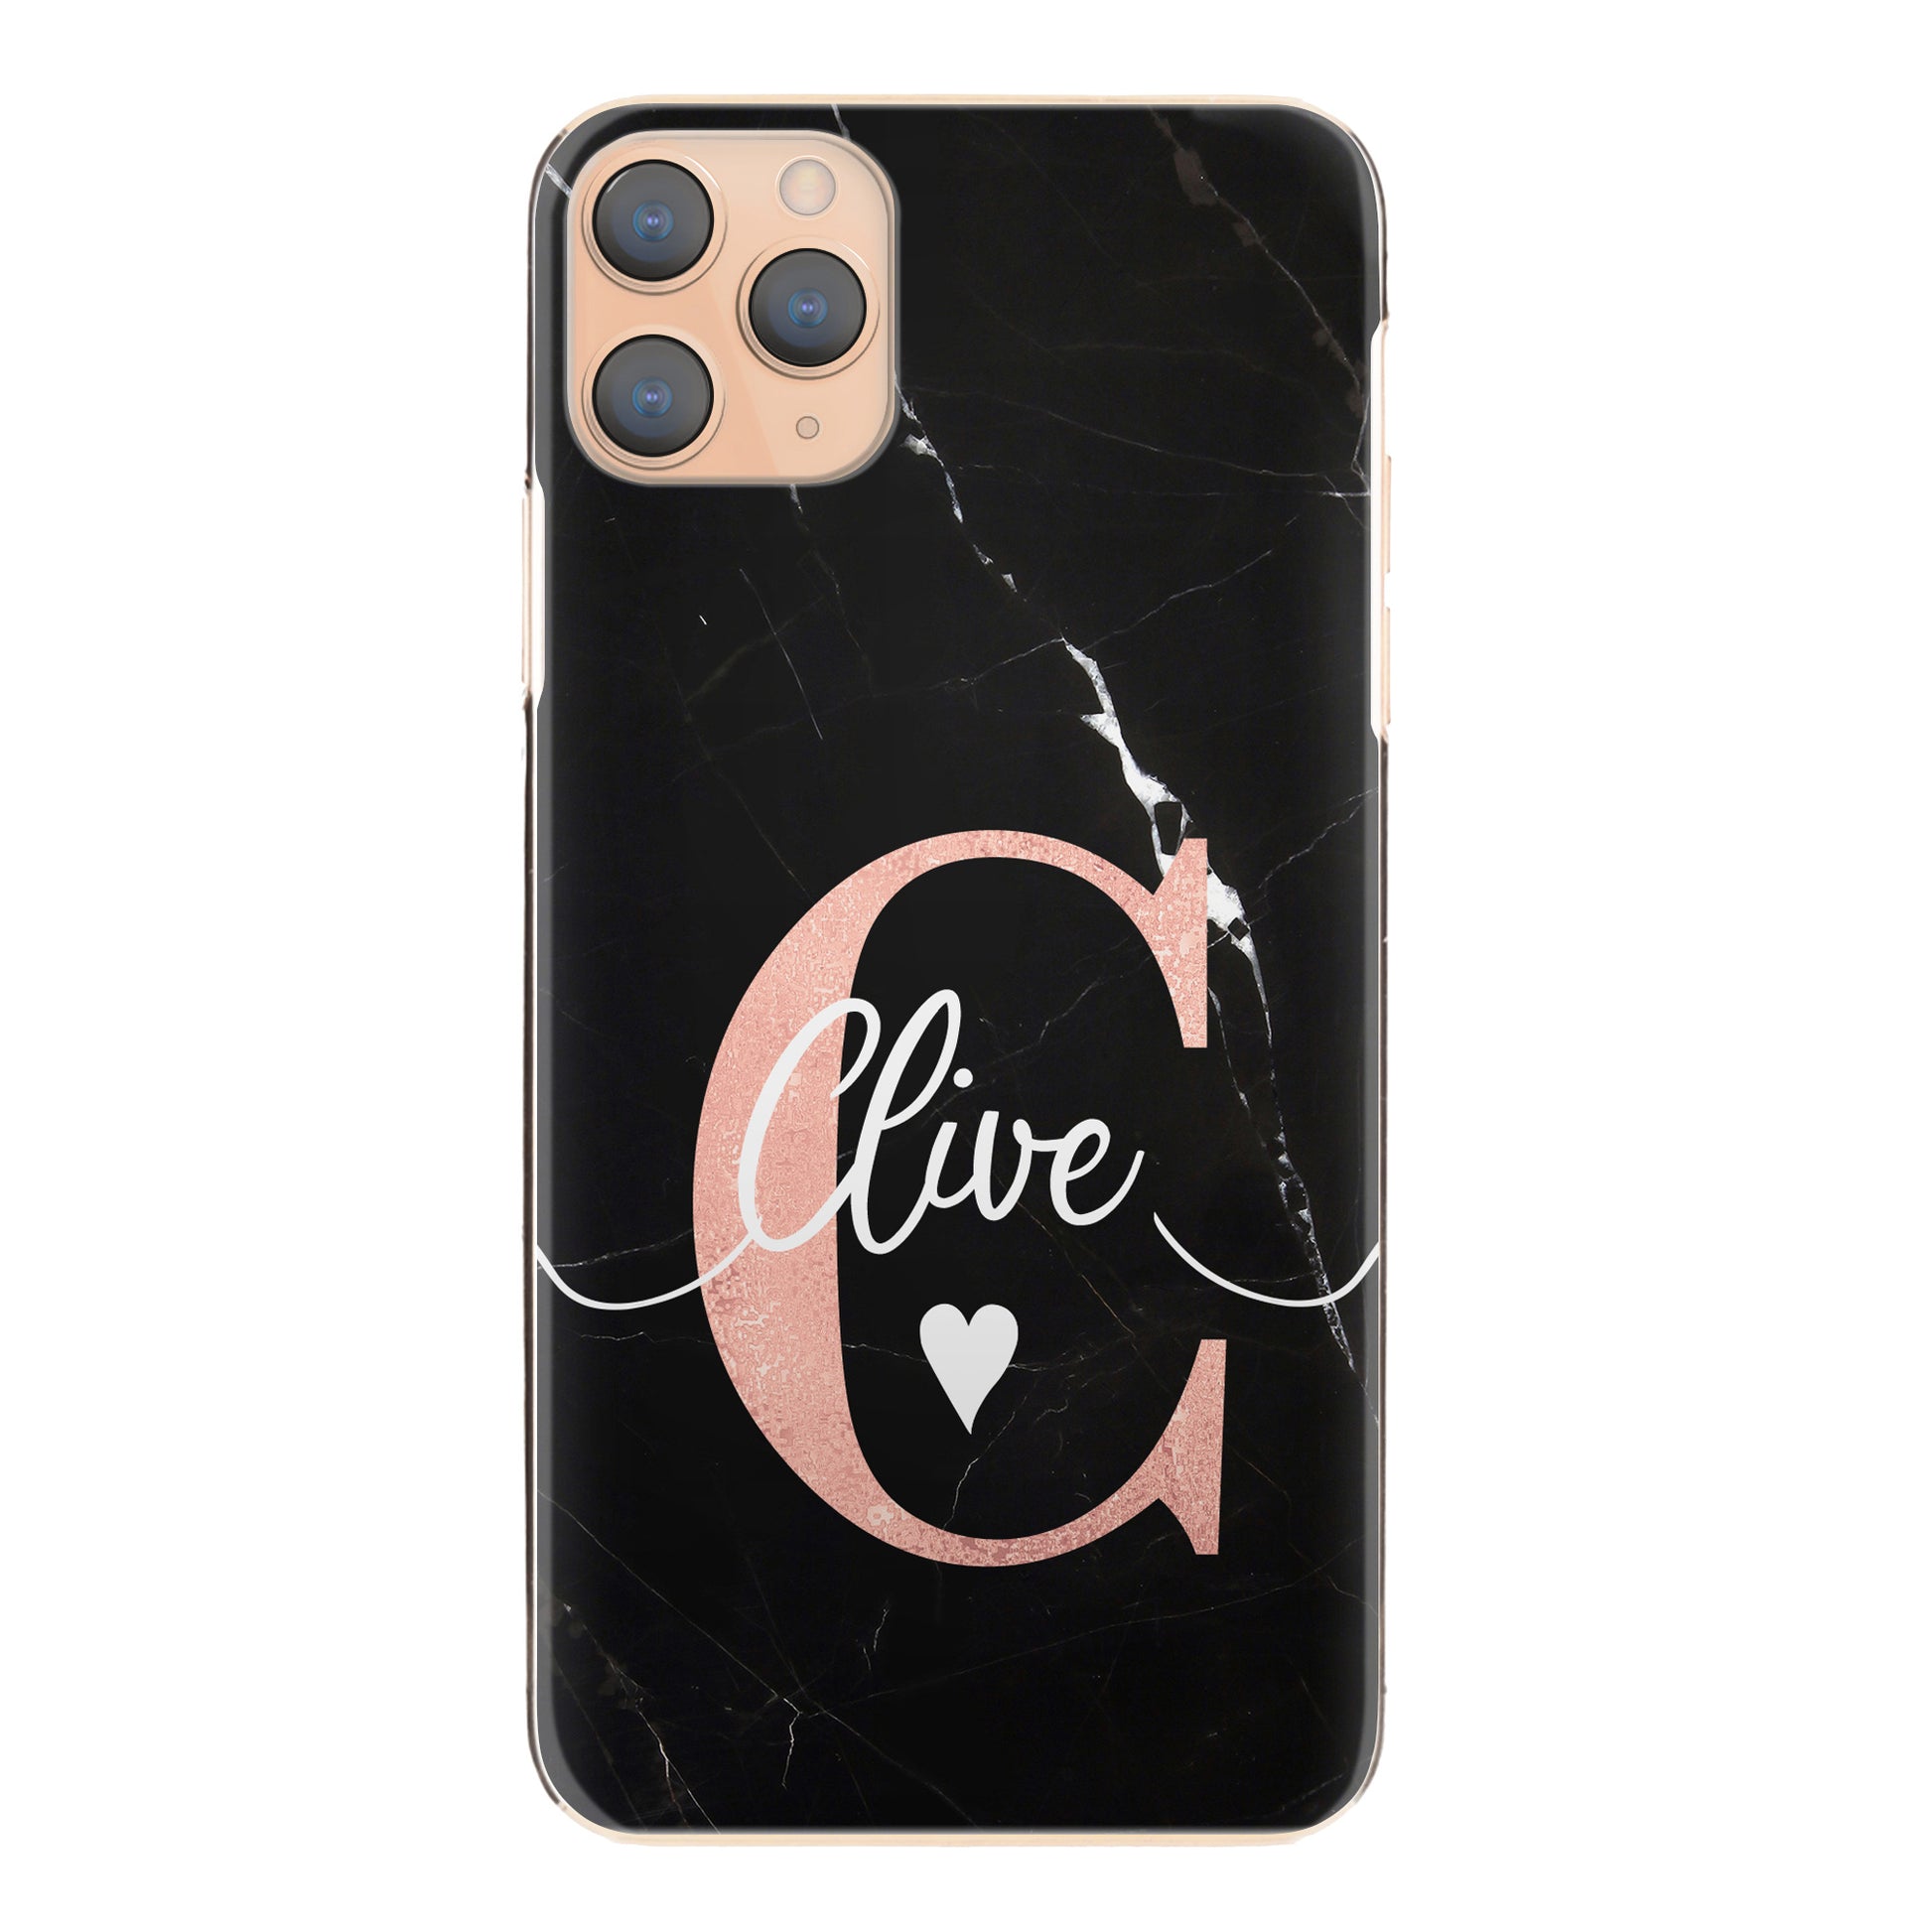 Personalised LG Phone Hard Case with Stylish Heart Text and Pink Initial on White Infused Black Marble